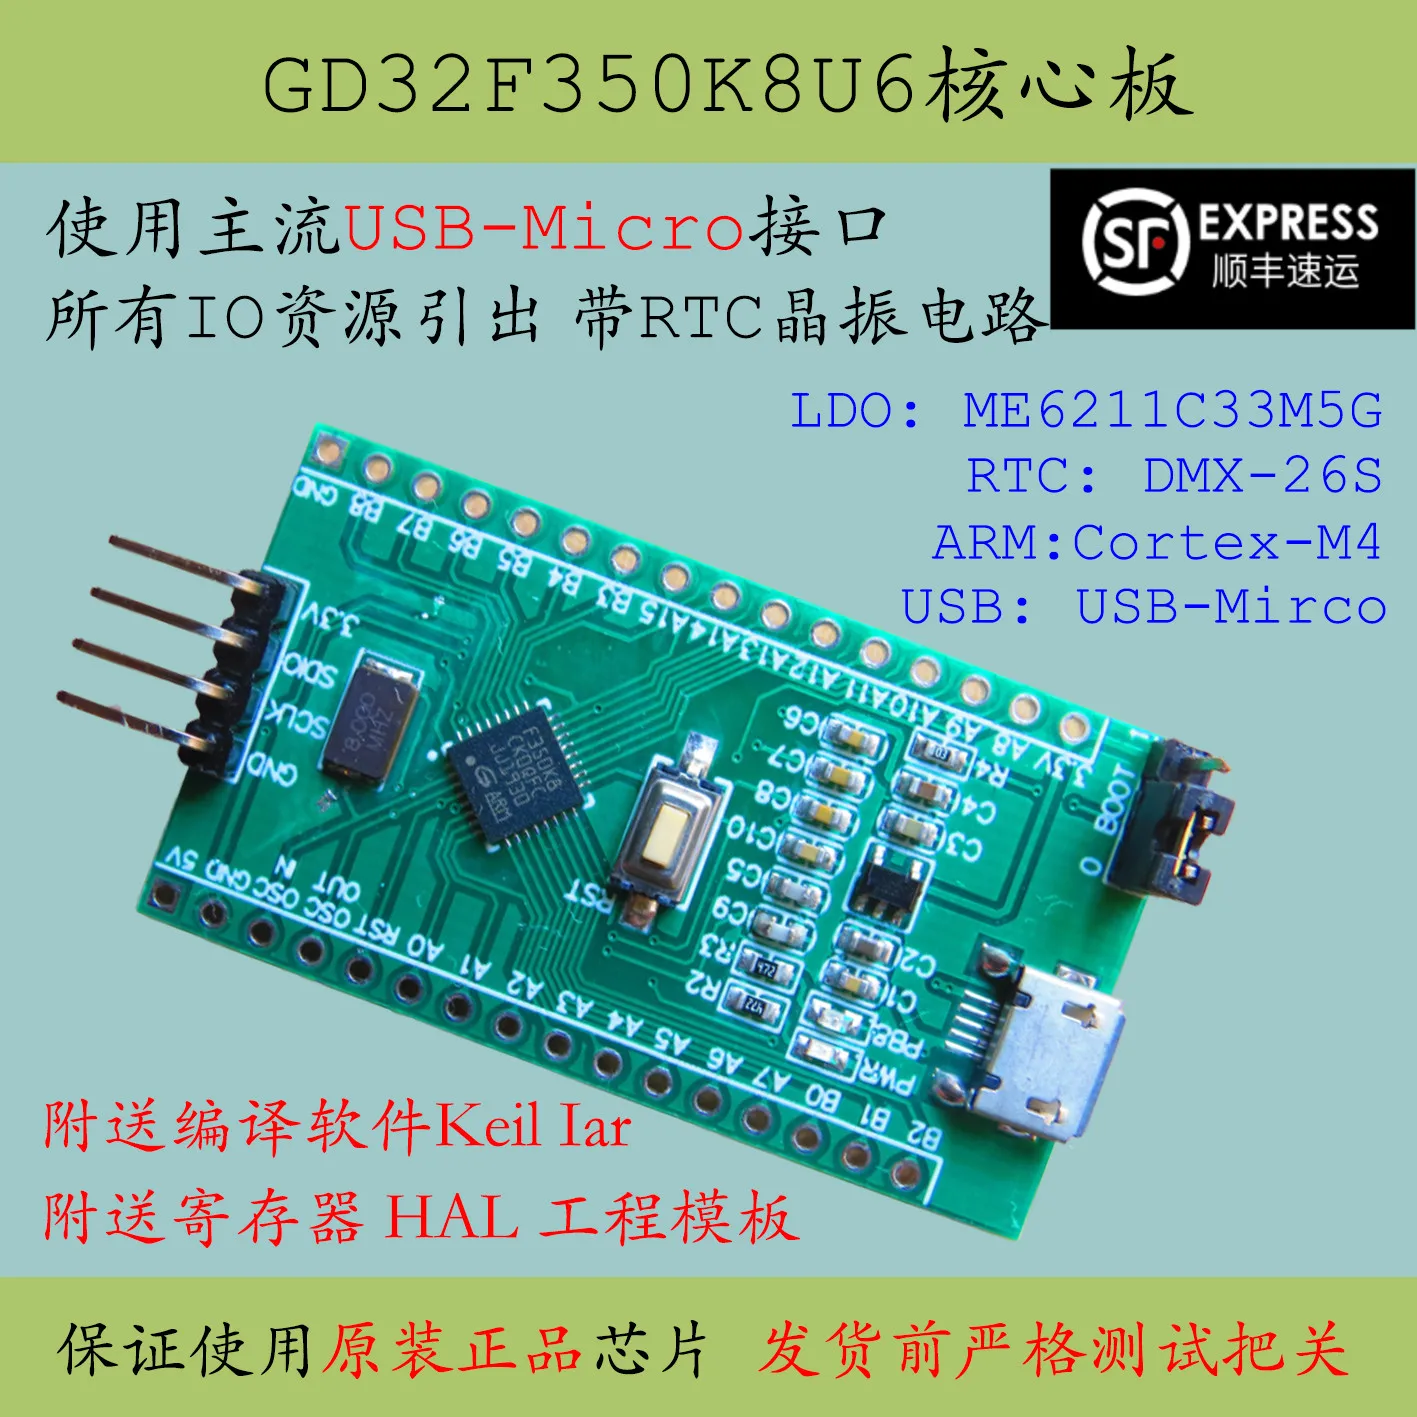 

The gd32f350k8u6 core board M4 replaces the STM32 new product with the high-performance F350 minimum system development board